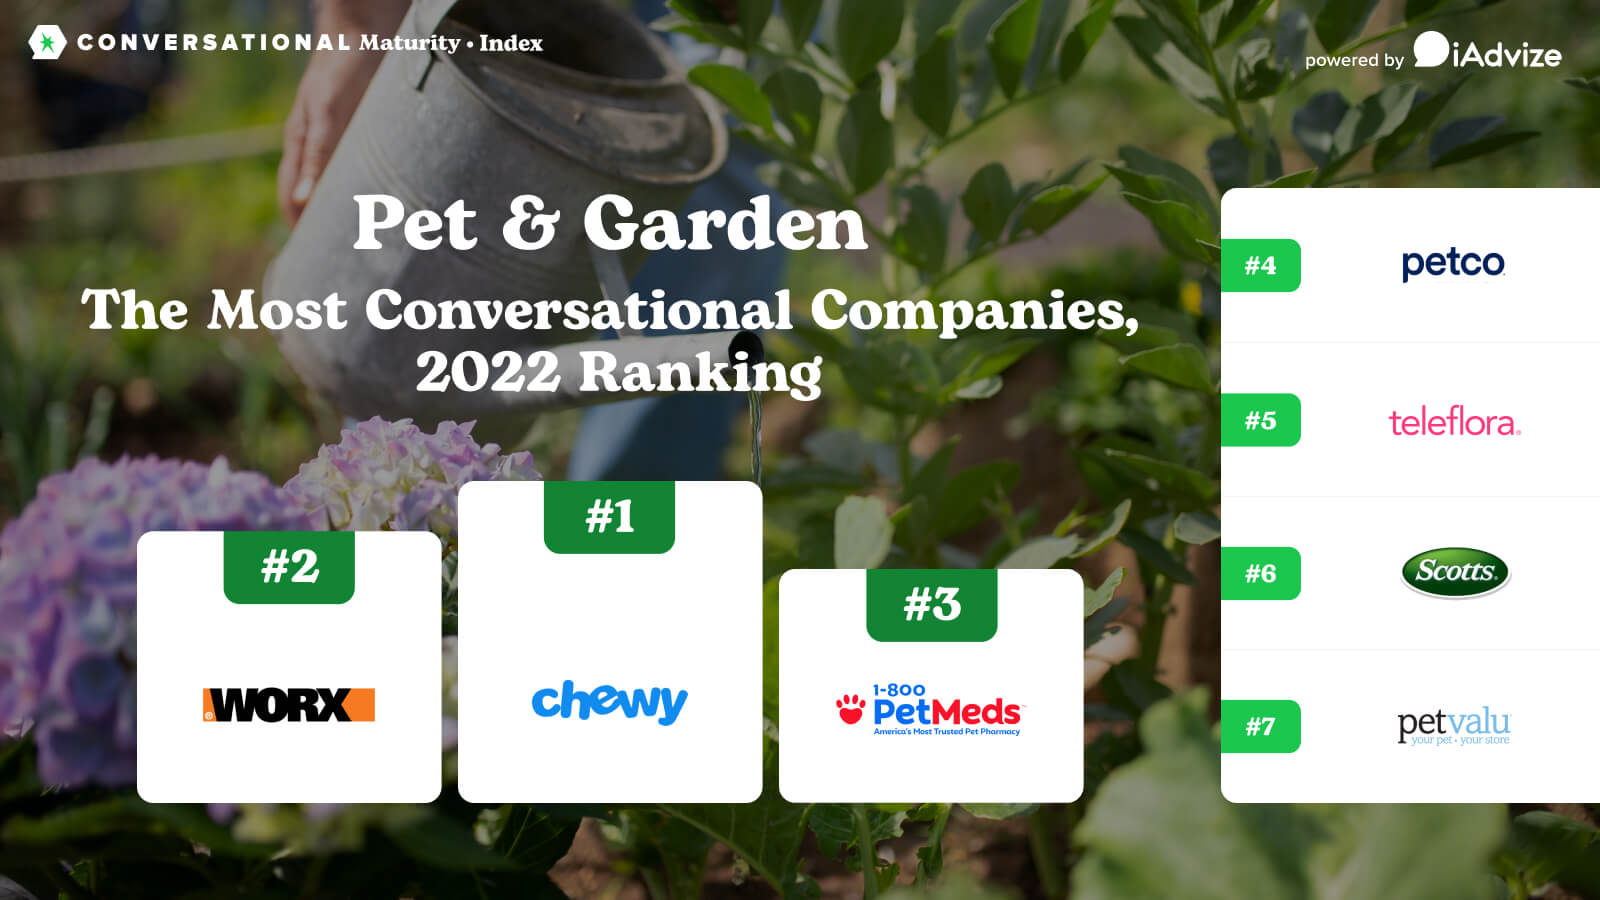  Featured image: Conversational maturity index for pet and garden companies - Read full post: Conversational Maturity Index: Pet and Garden Companies 2022 Ranking